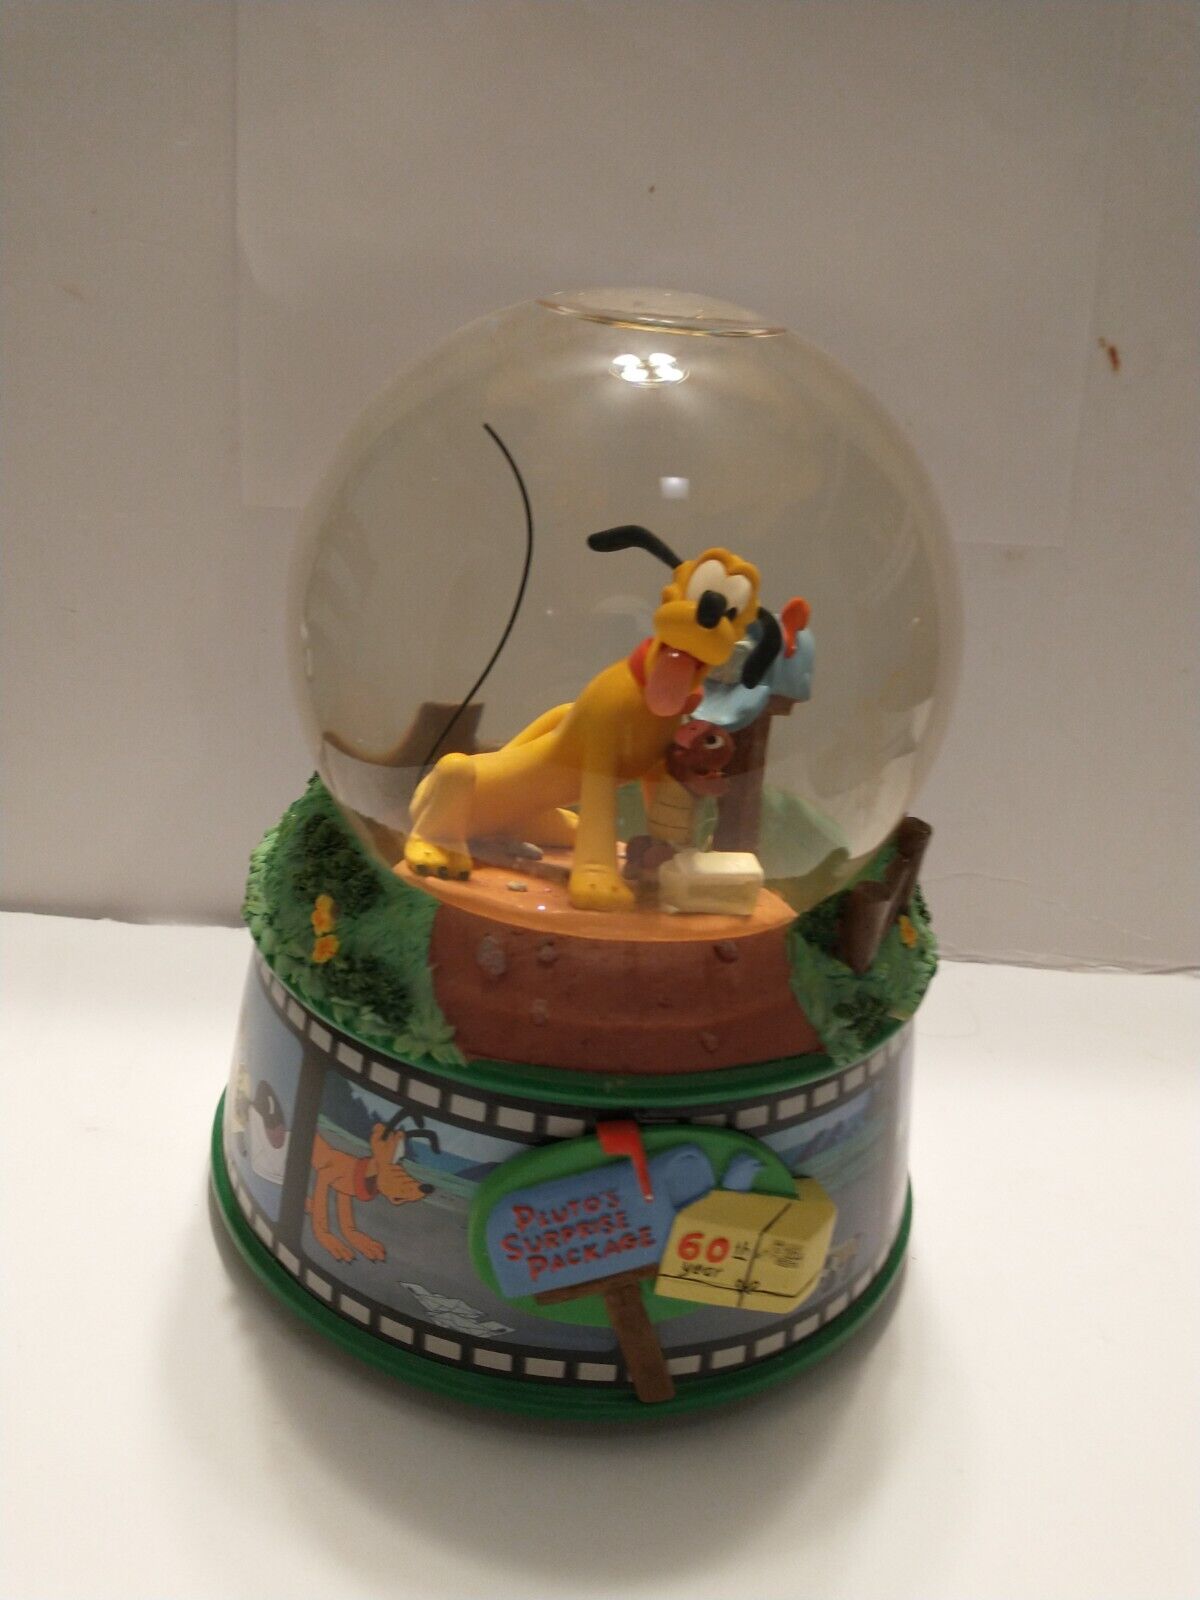 Disney's Pluto's Surprise Package 60th Year Waterglobe.In Mint Condition. Rare.